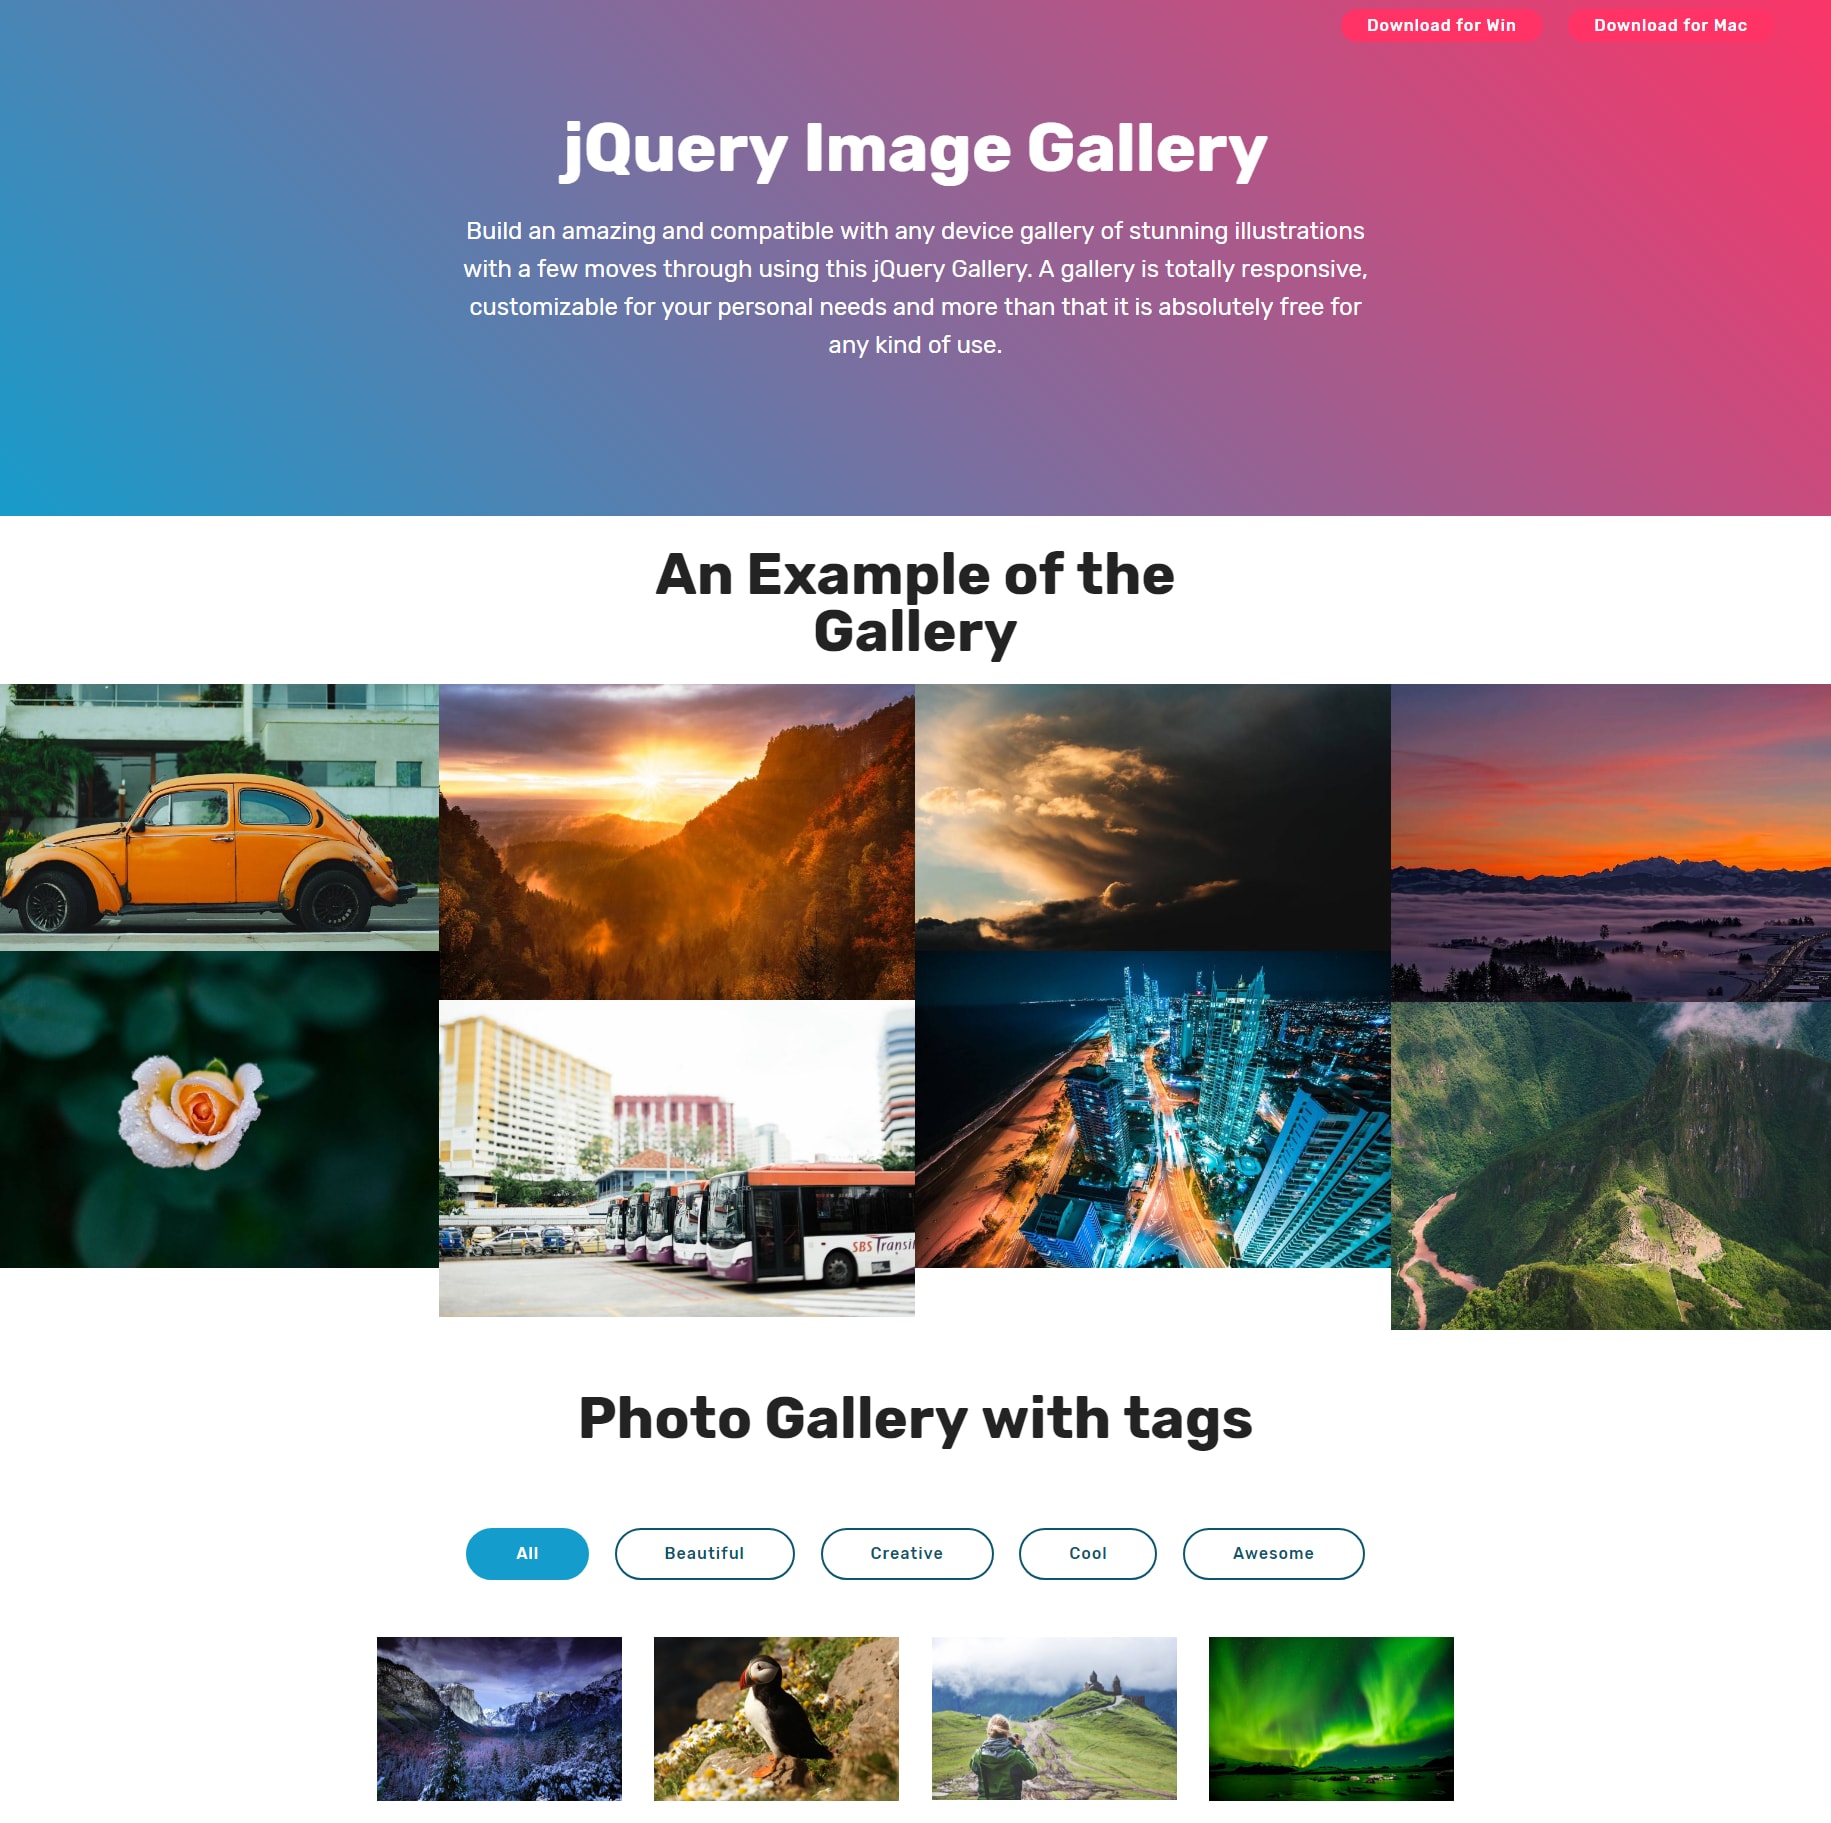 Responsive Bootstrap Image Gallery